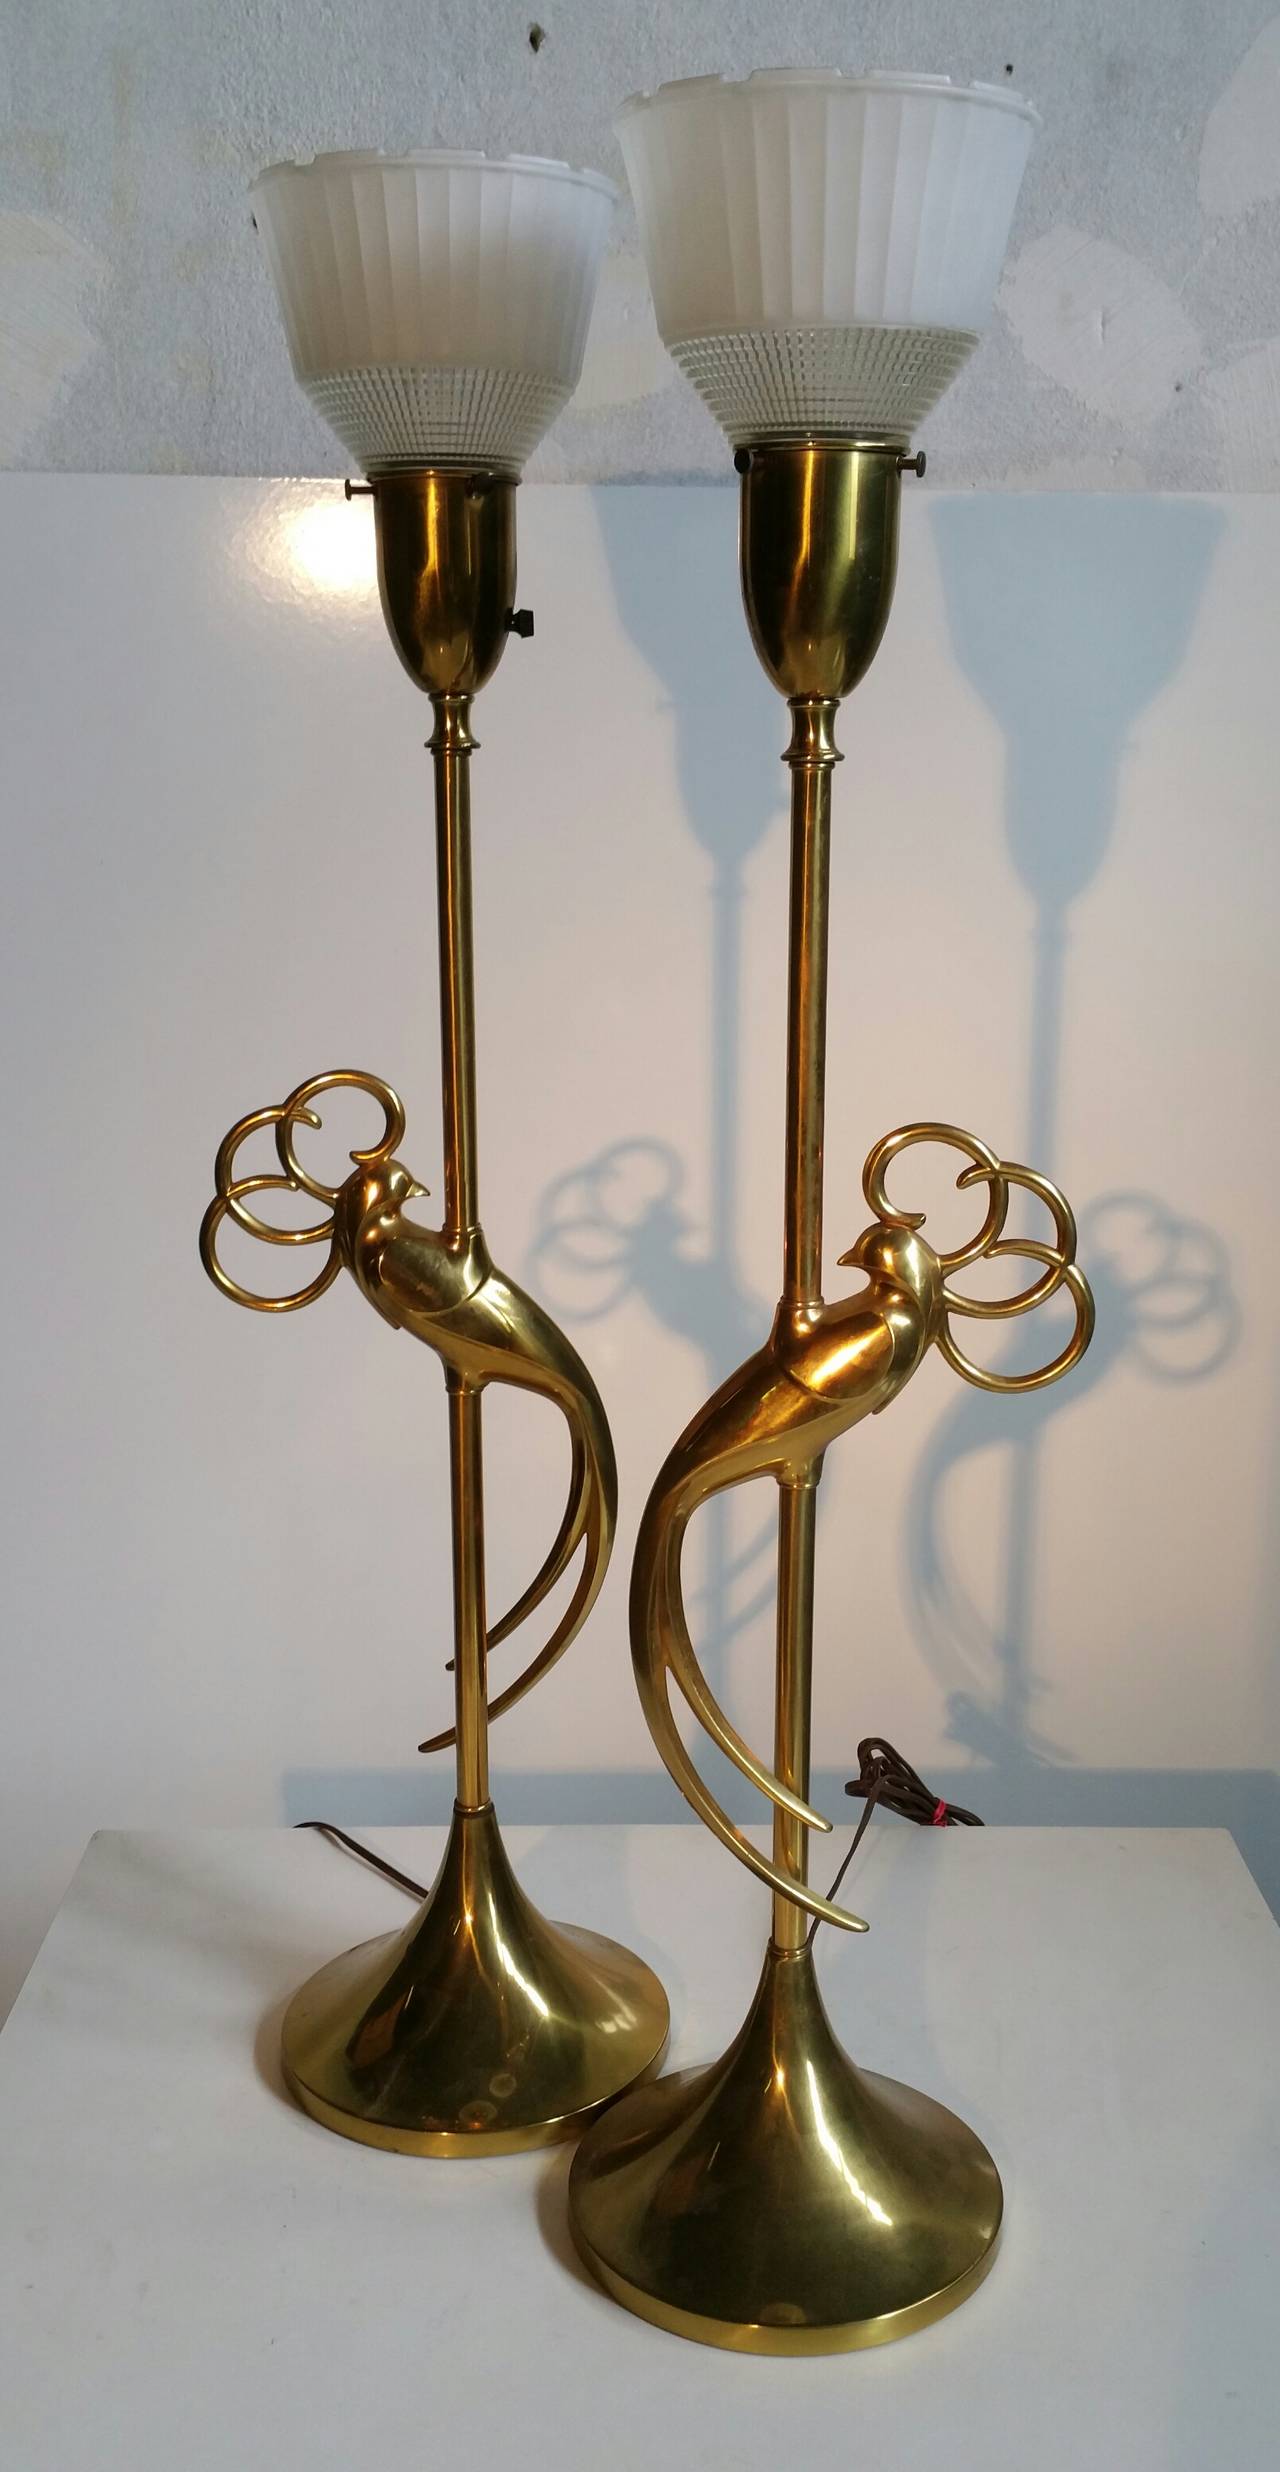 Pair of Brass Table Lamps with Stylized Exotic Bird at Center In Good Condition For Sale In Buffalo, NY